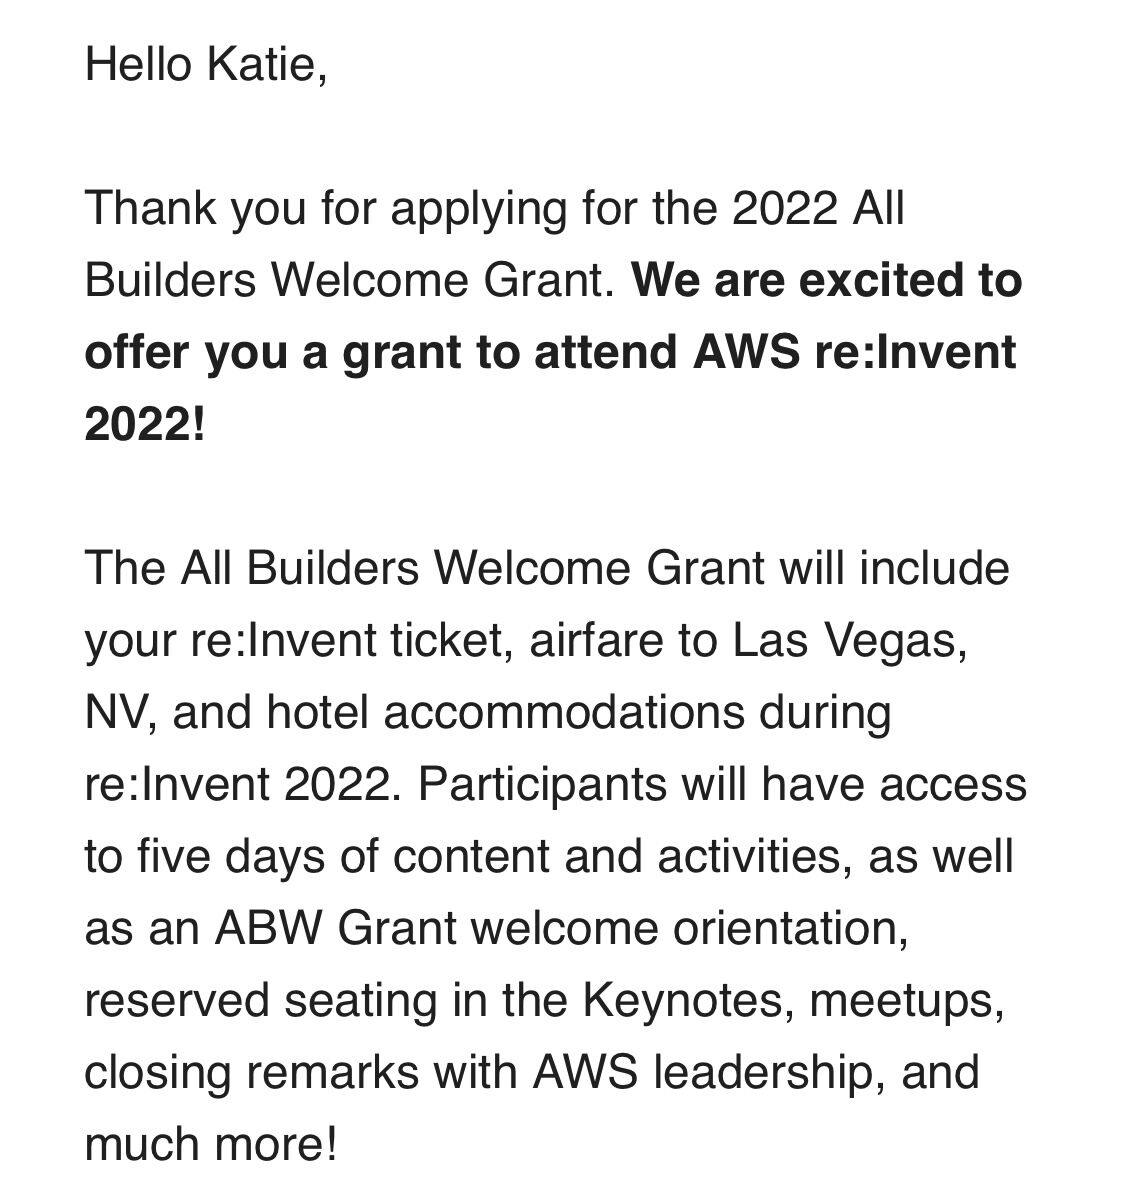 my acceptance email for the All Builders Welcome grant including an overview of the details of what the grant entails